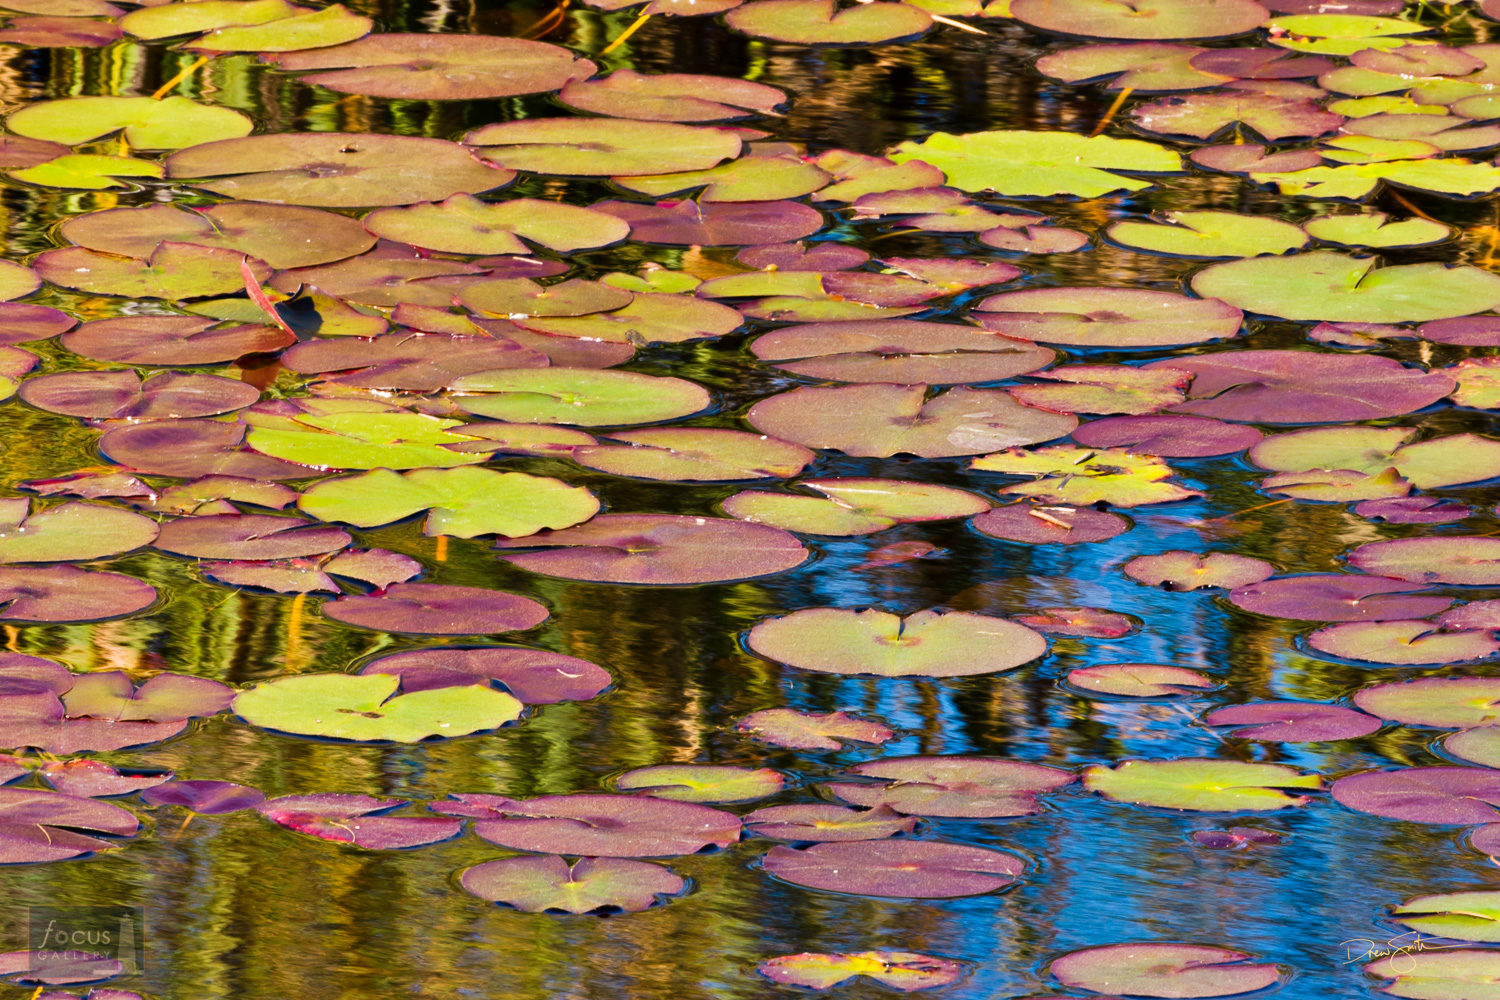 Detail of water lily pads at St. Marks National Wildlife Refuge, Florida.